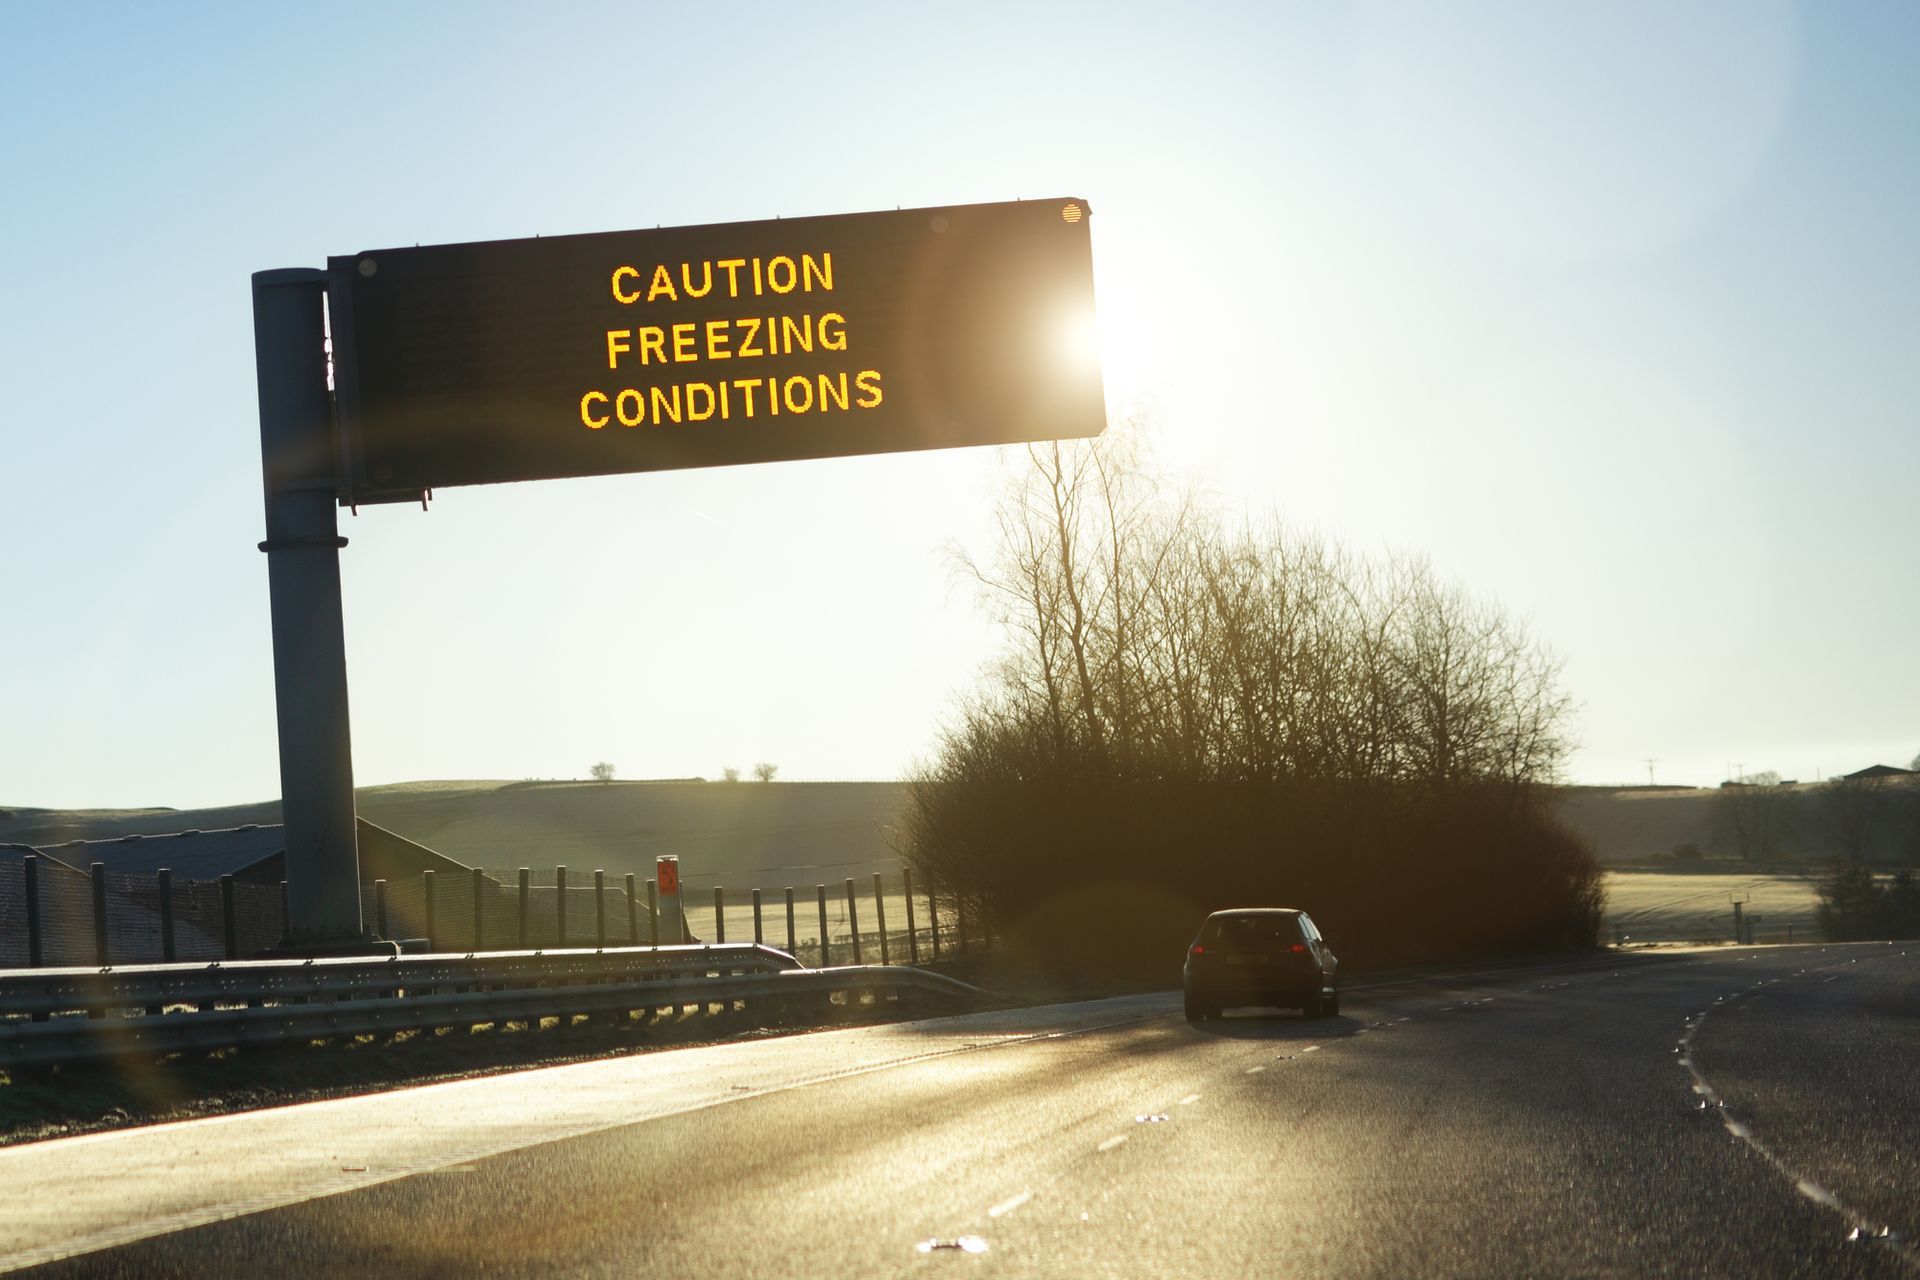 A car is driving down a highway under a sign that says caution freezing conditions